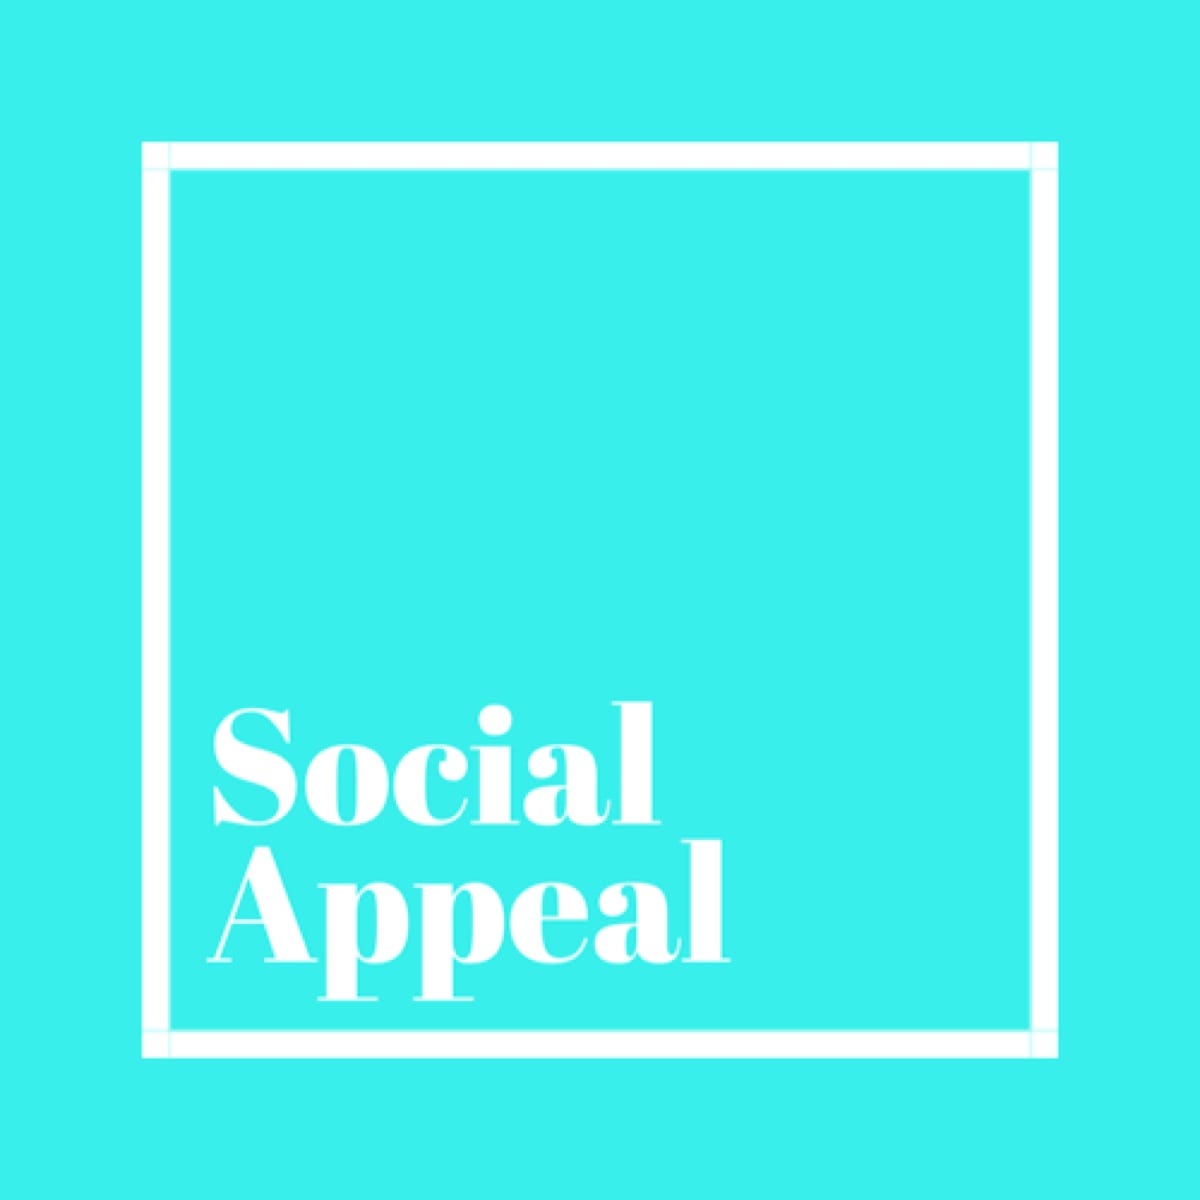 About Social Appeal Medium